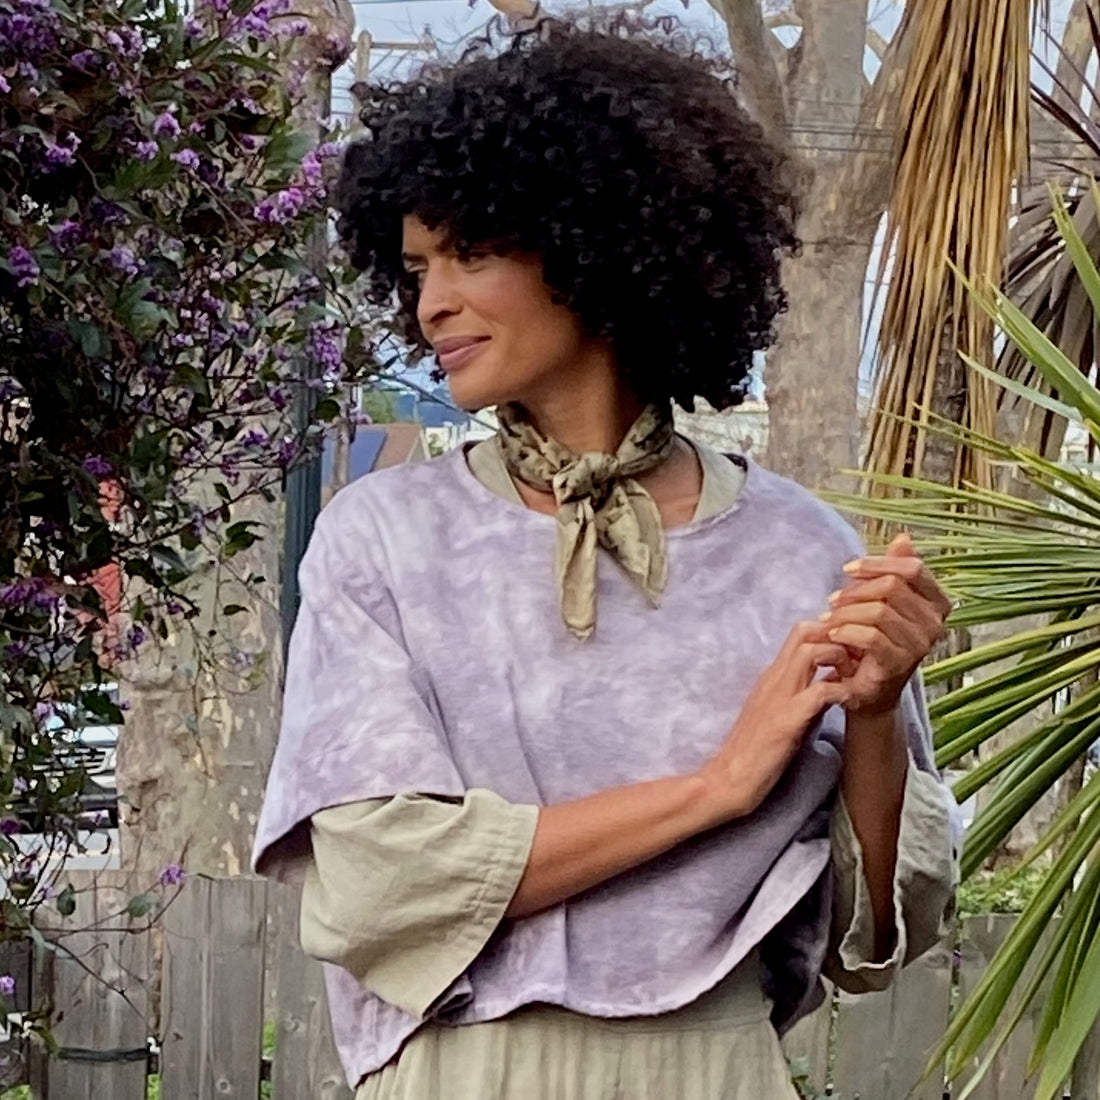 Allyn Boxy Tee: Sustainable Warmth & Effortless Style in Lavender